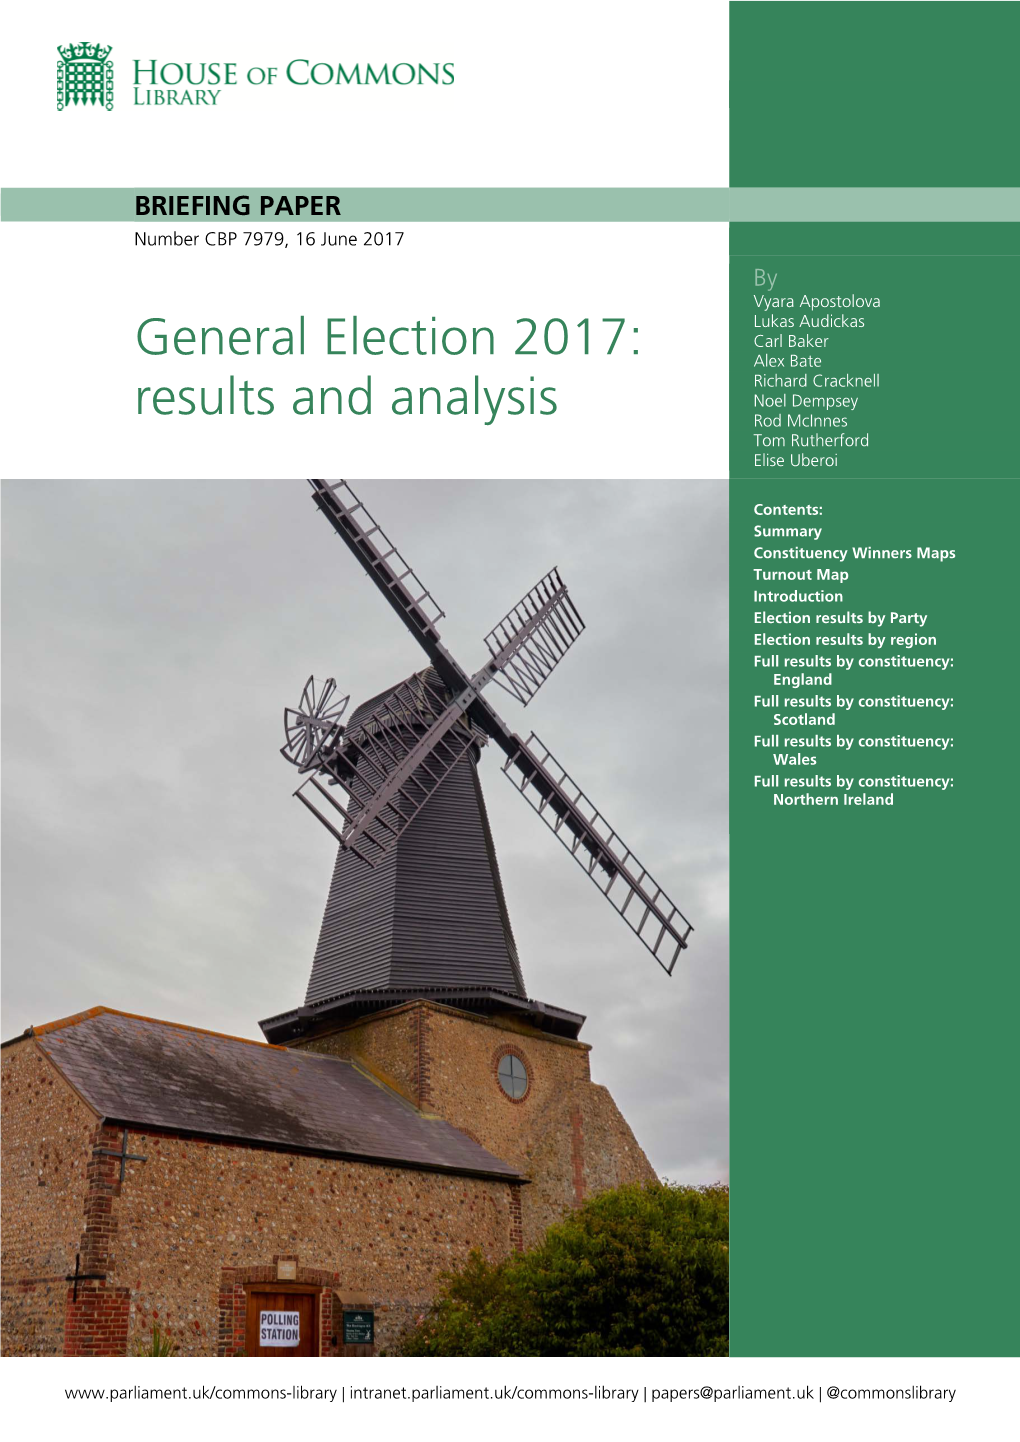 General Election 2017: Alex Bate Richard Cracknell Noel Dempsey Results and Analysis Rod Mcinnes Tom Rutherford Elise Uberoi